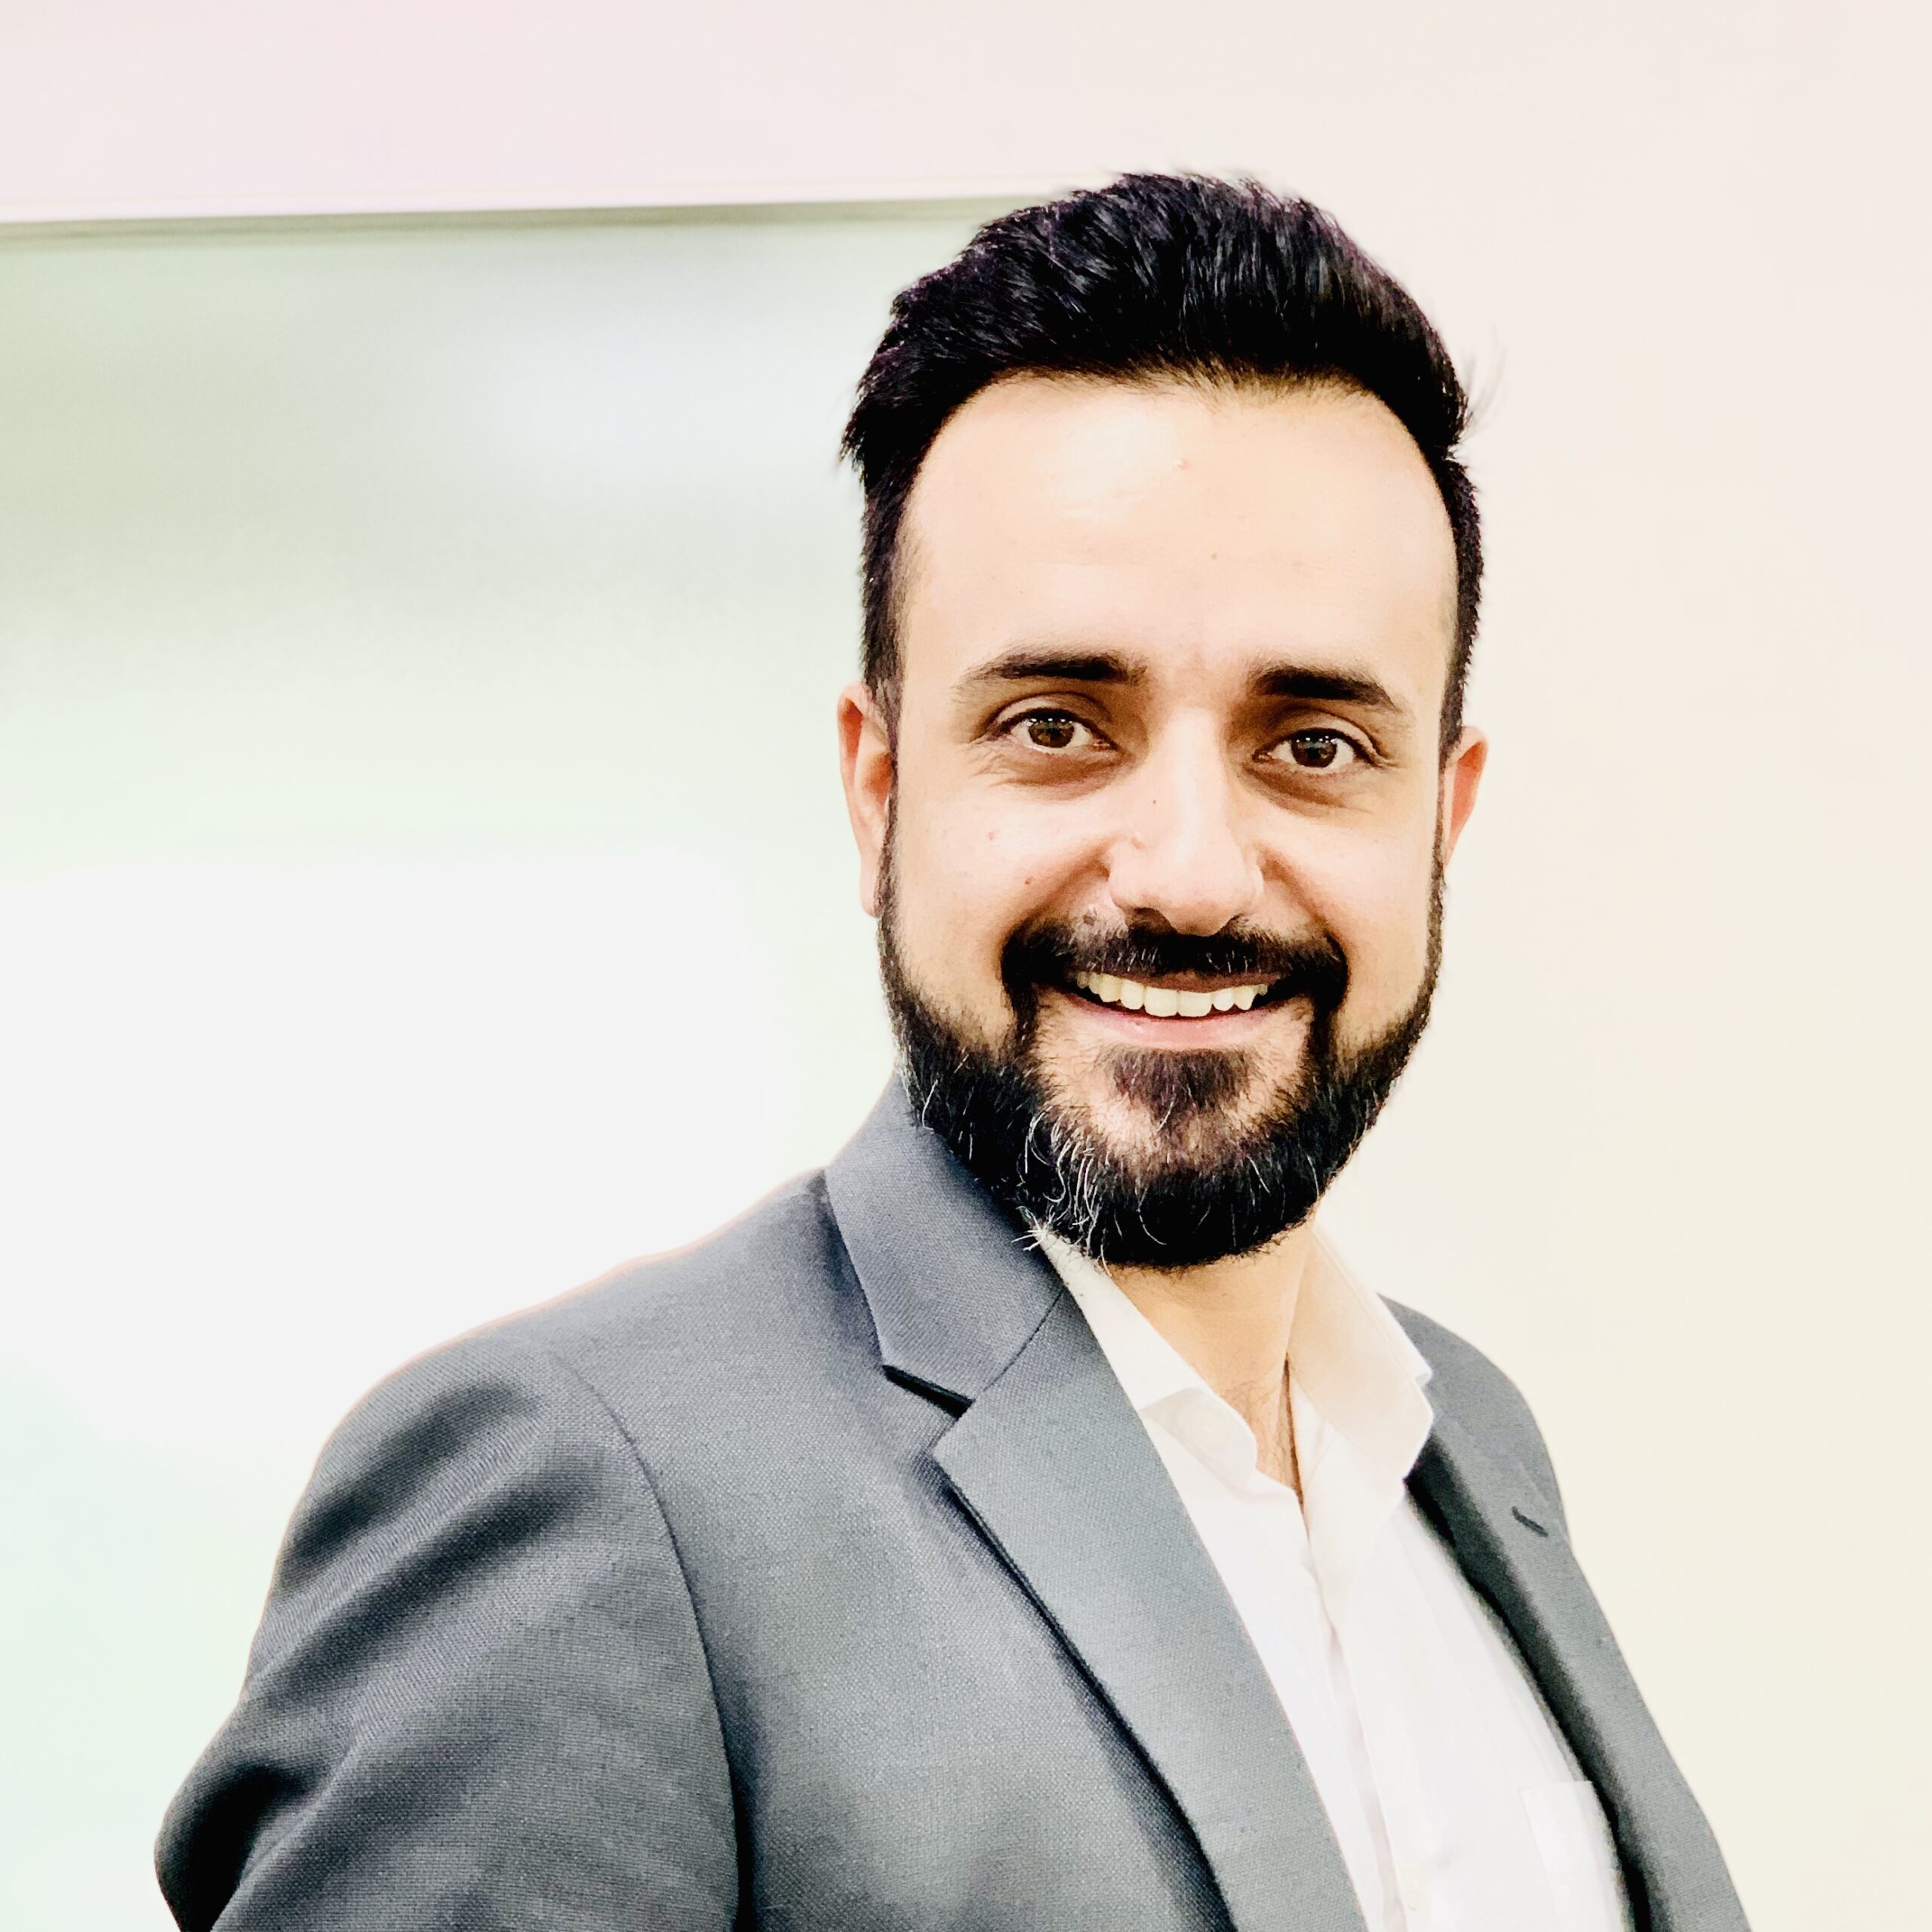 ‘Branding, revenue, and positioning are all important factors to consider’ : Suhas Sharma, Director of Sales, Renaissance Bengaluru Race Course Hotel